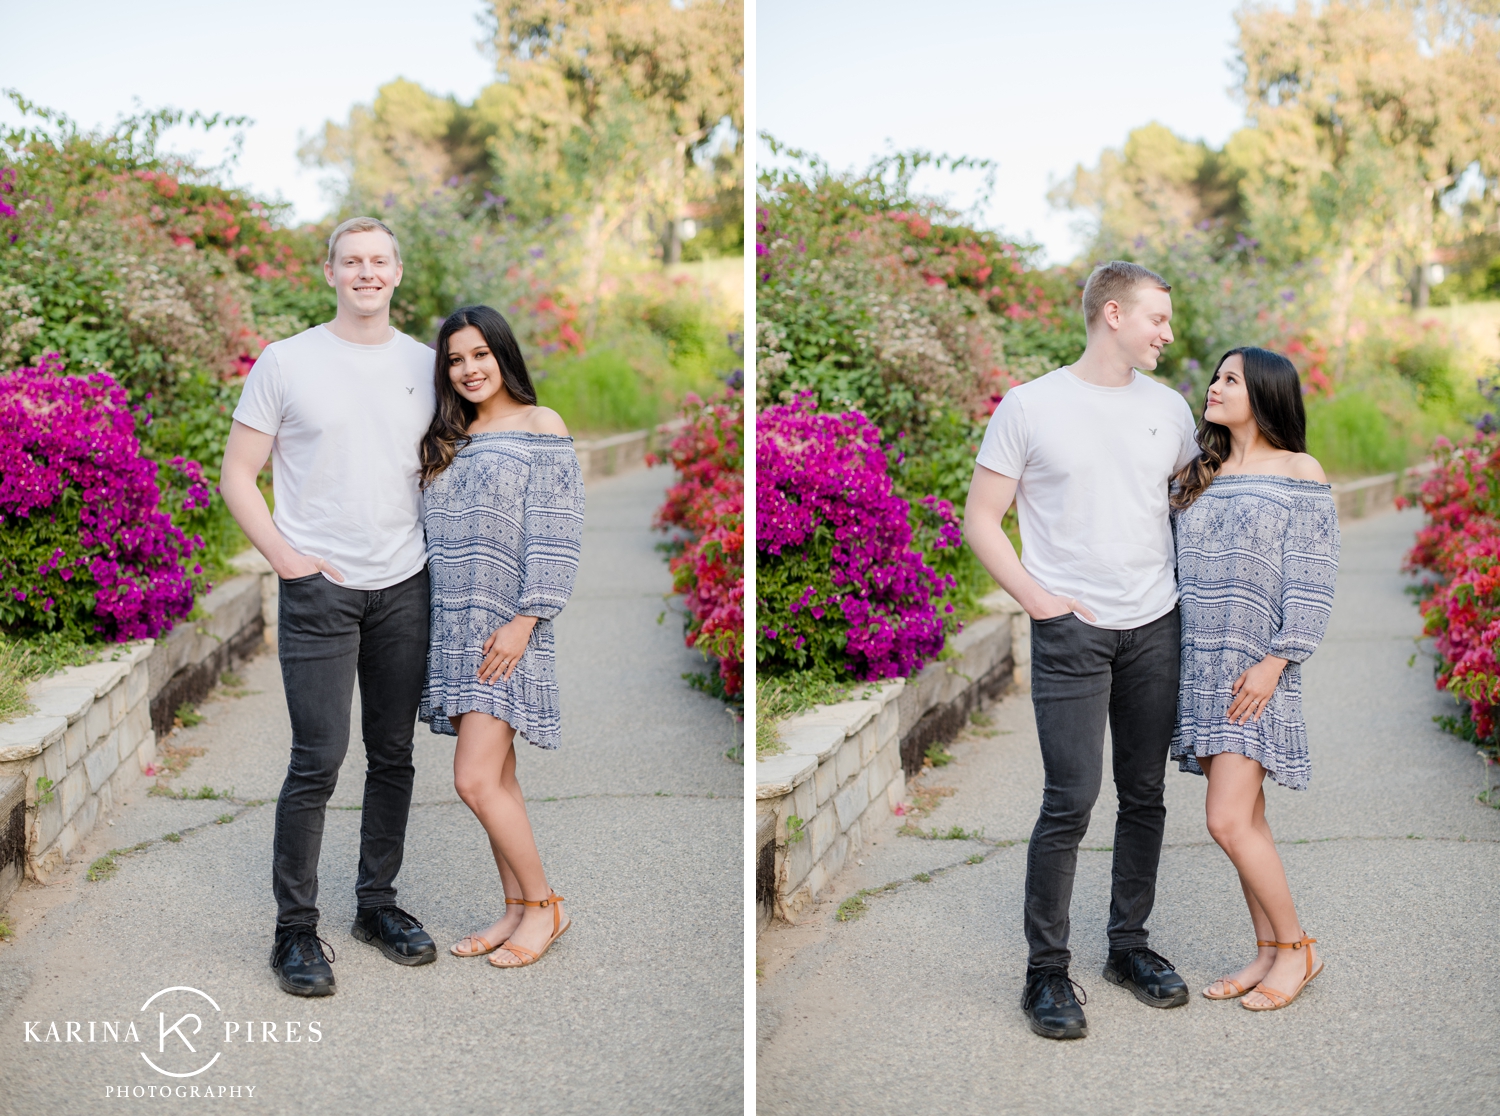 Kristen and Caylan’s Redondo Beach Engagement Session